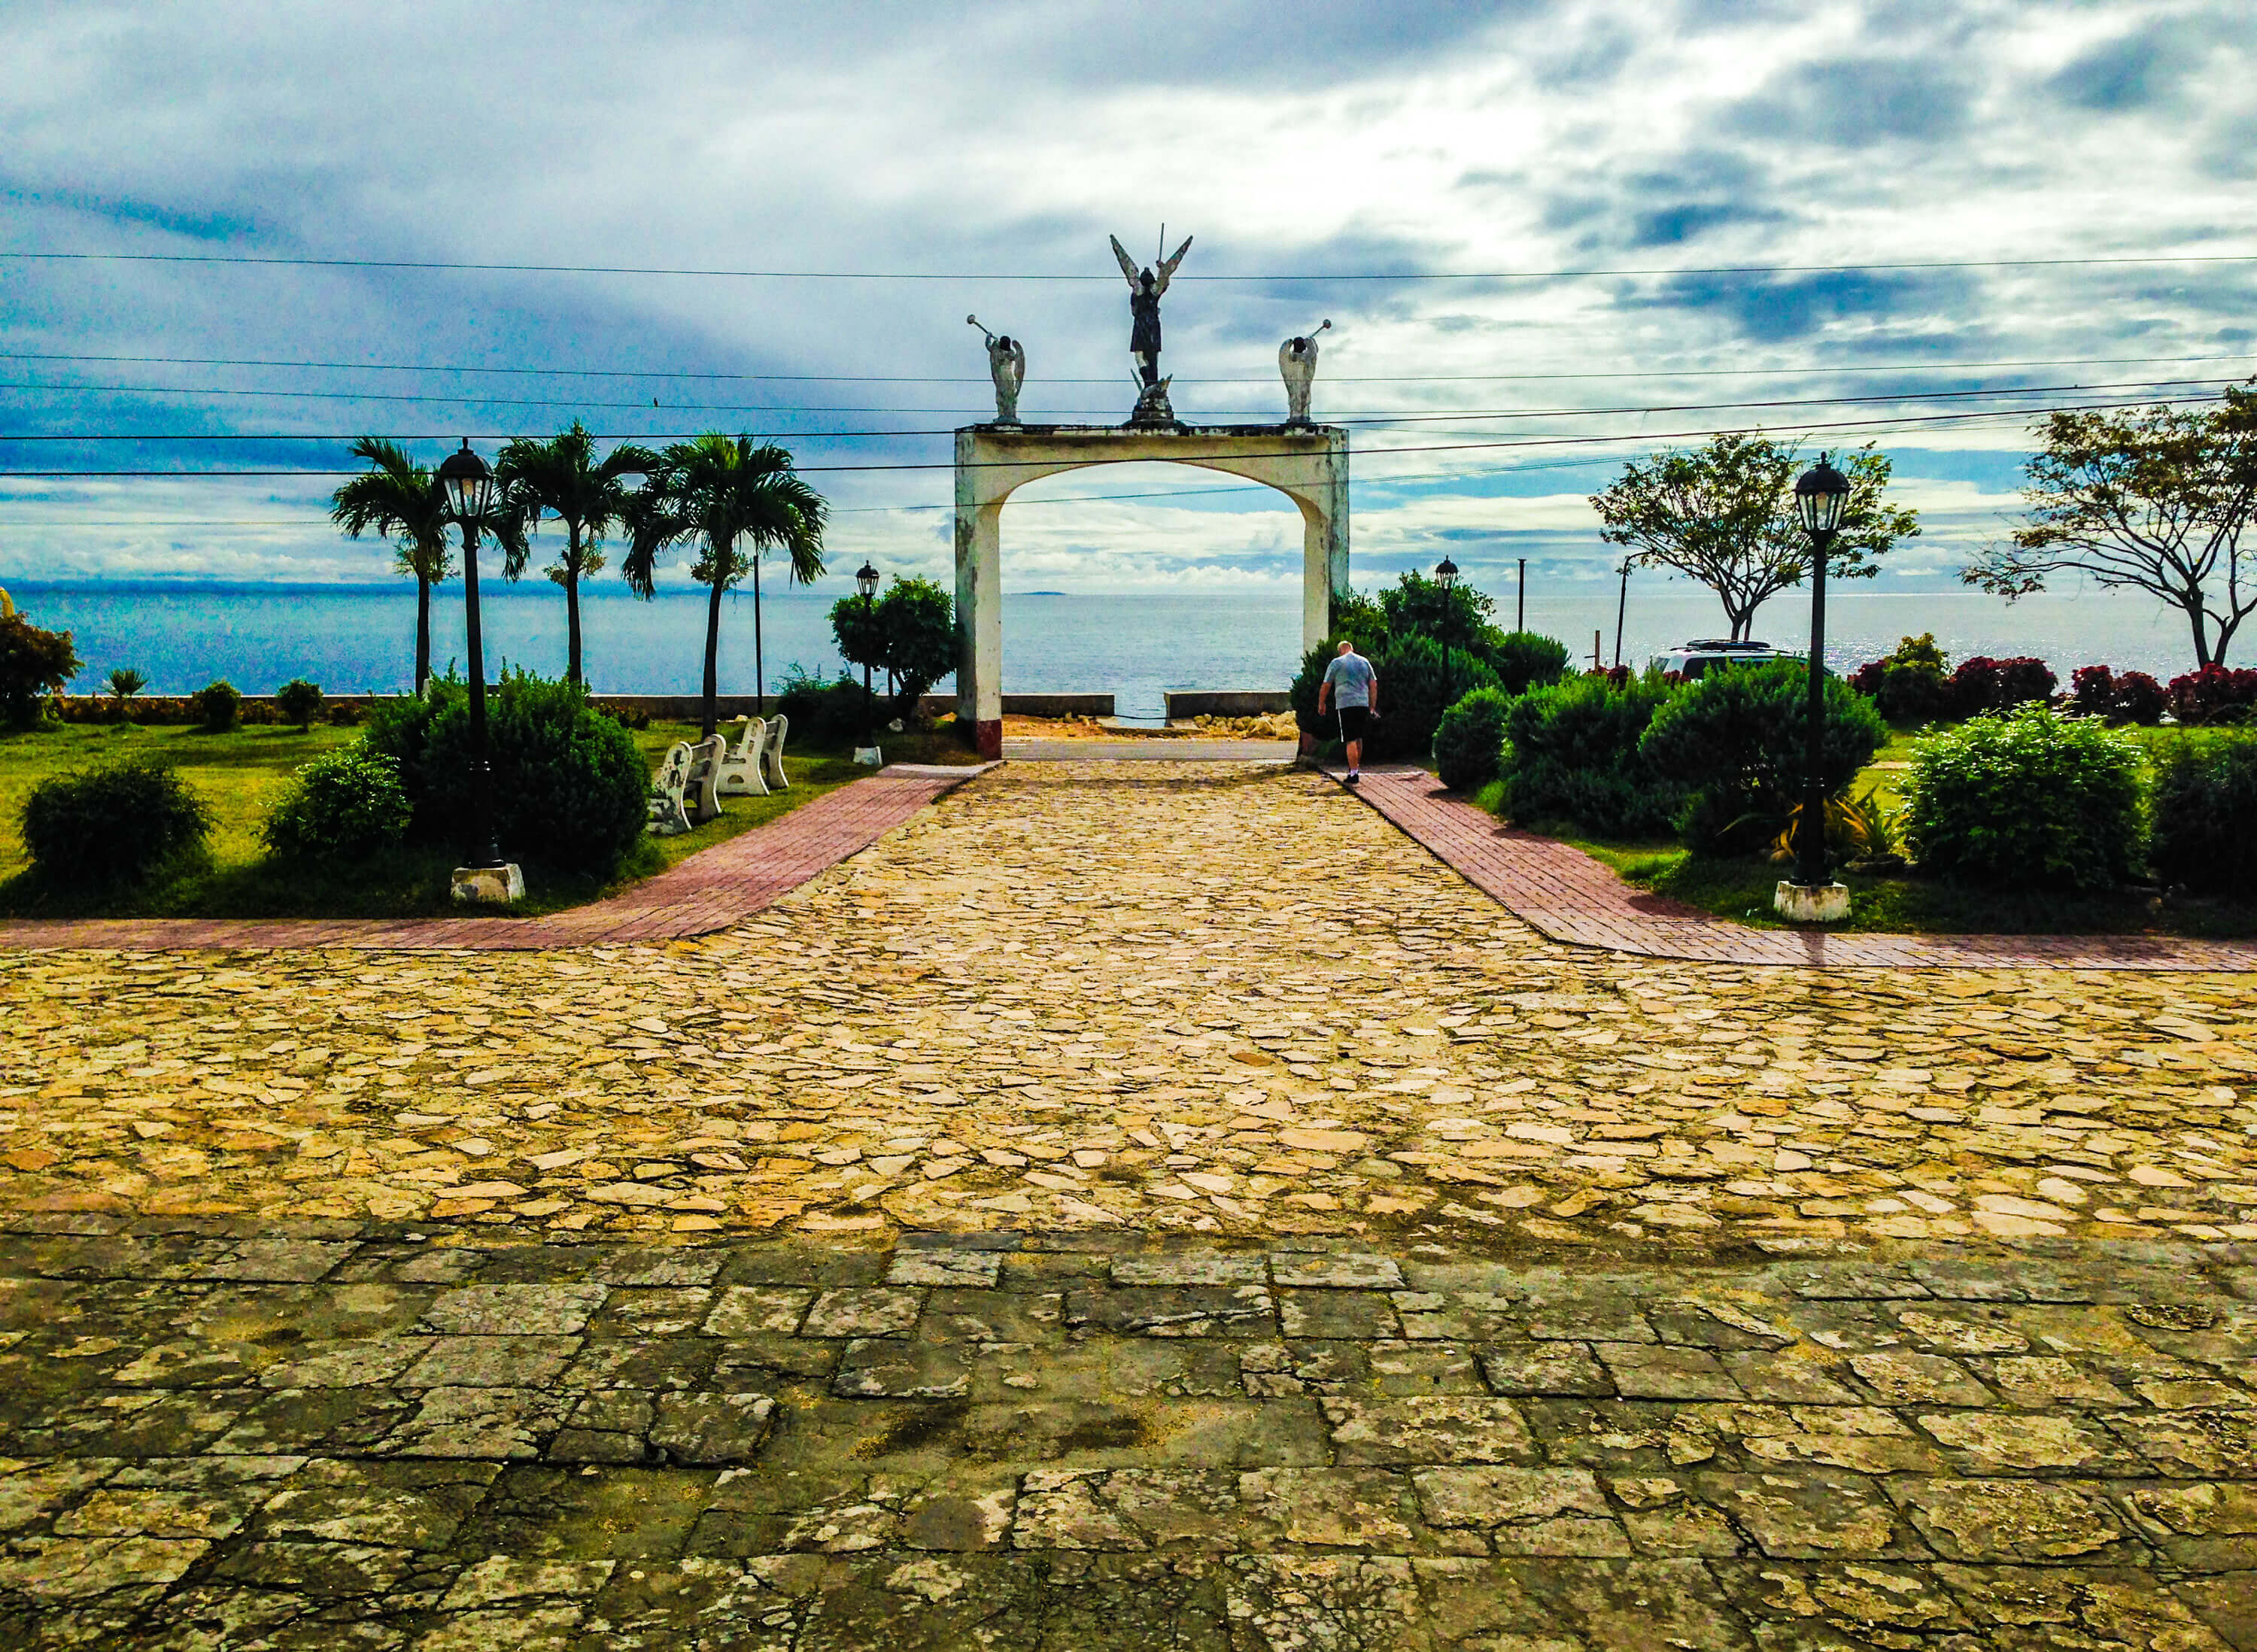 Looking out to sea from the church in Boljoon. The area used to be fortified and was the center of Fr. Julian Bermejo's defensive network of watchtowers against raiders from Mindanao.